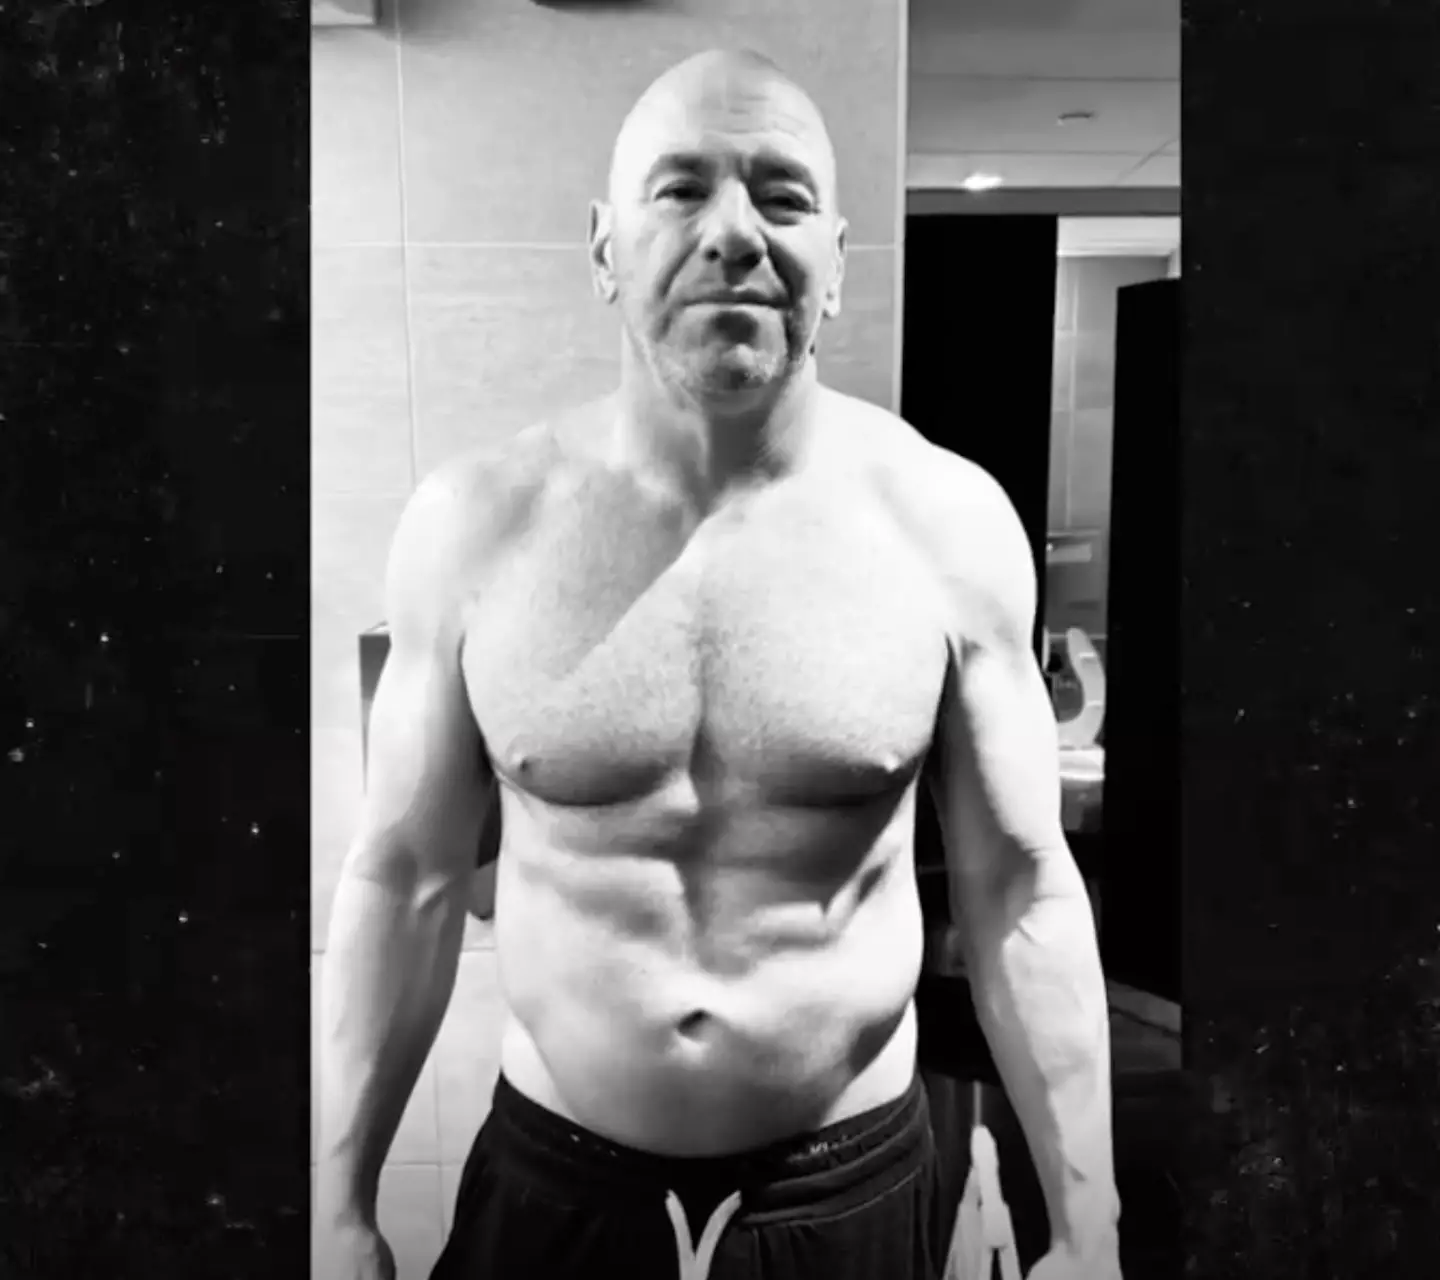 Dana White has been vocal about his dedication to getting in shape.